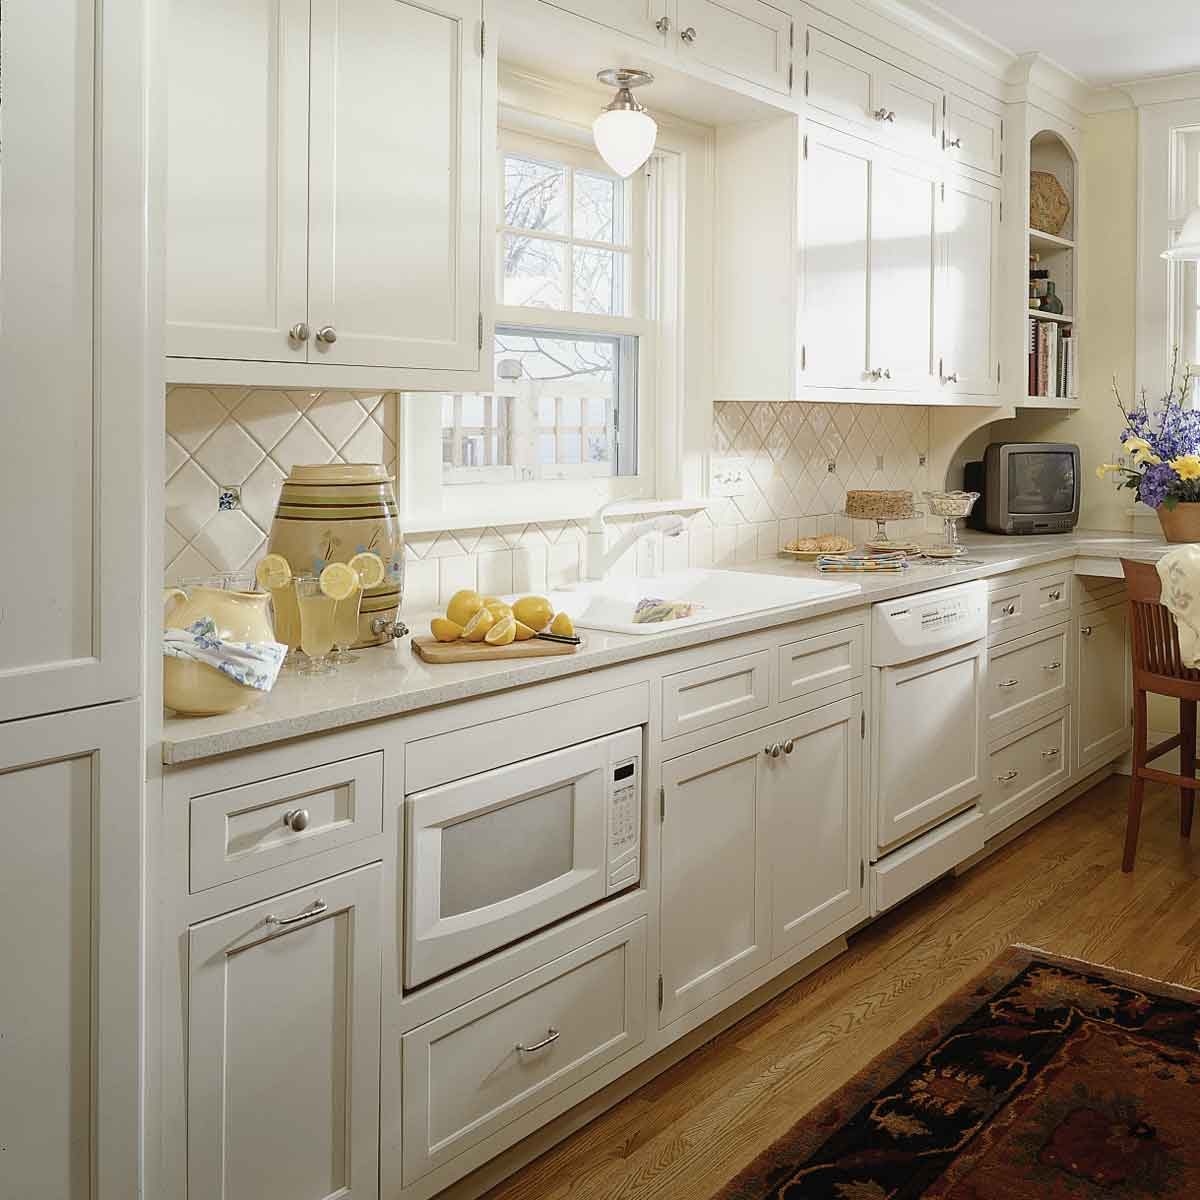 10 Small Kitchen Ideas to Maximize Space! | The Family ...